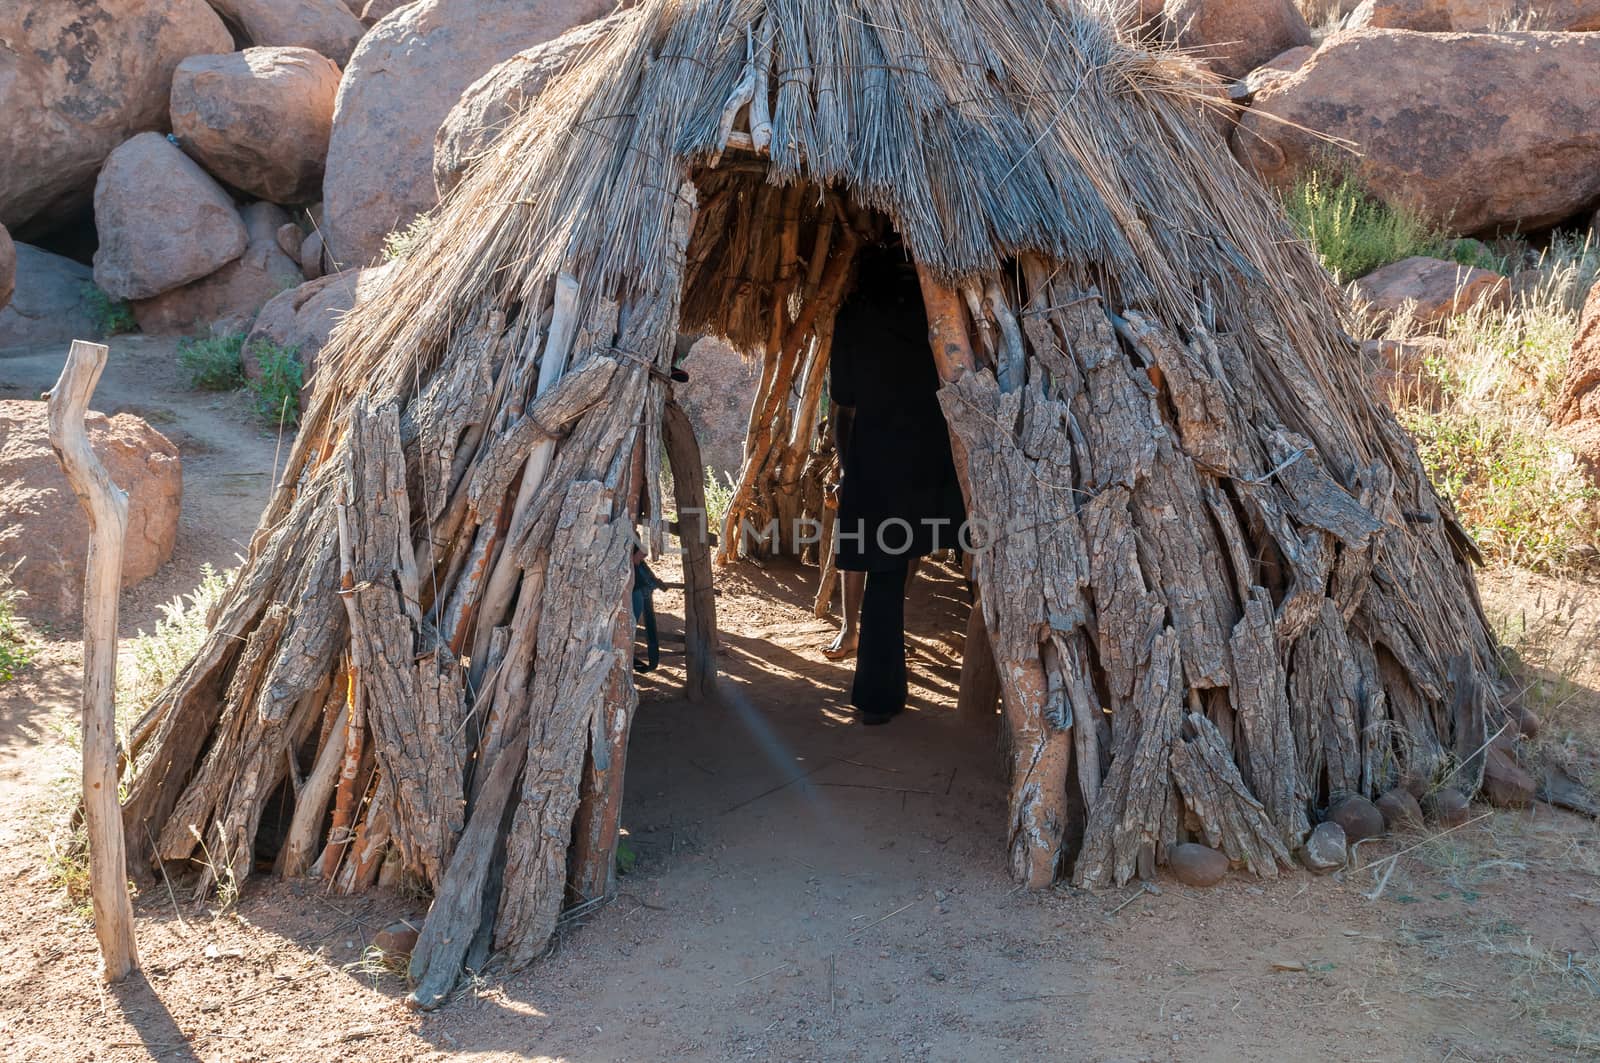 A traditional hut at the Damara Living Museum in Damaraland, Namibia